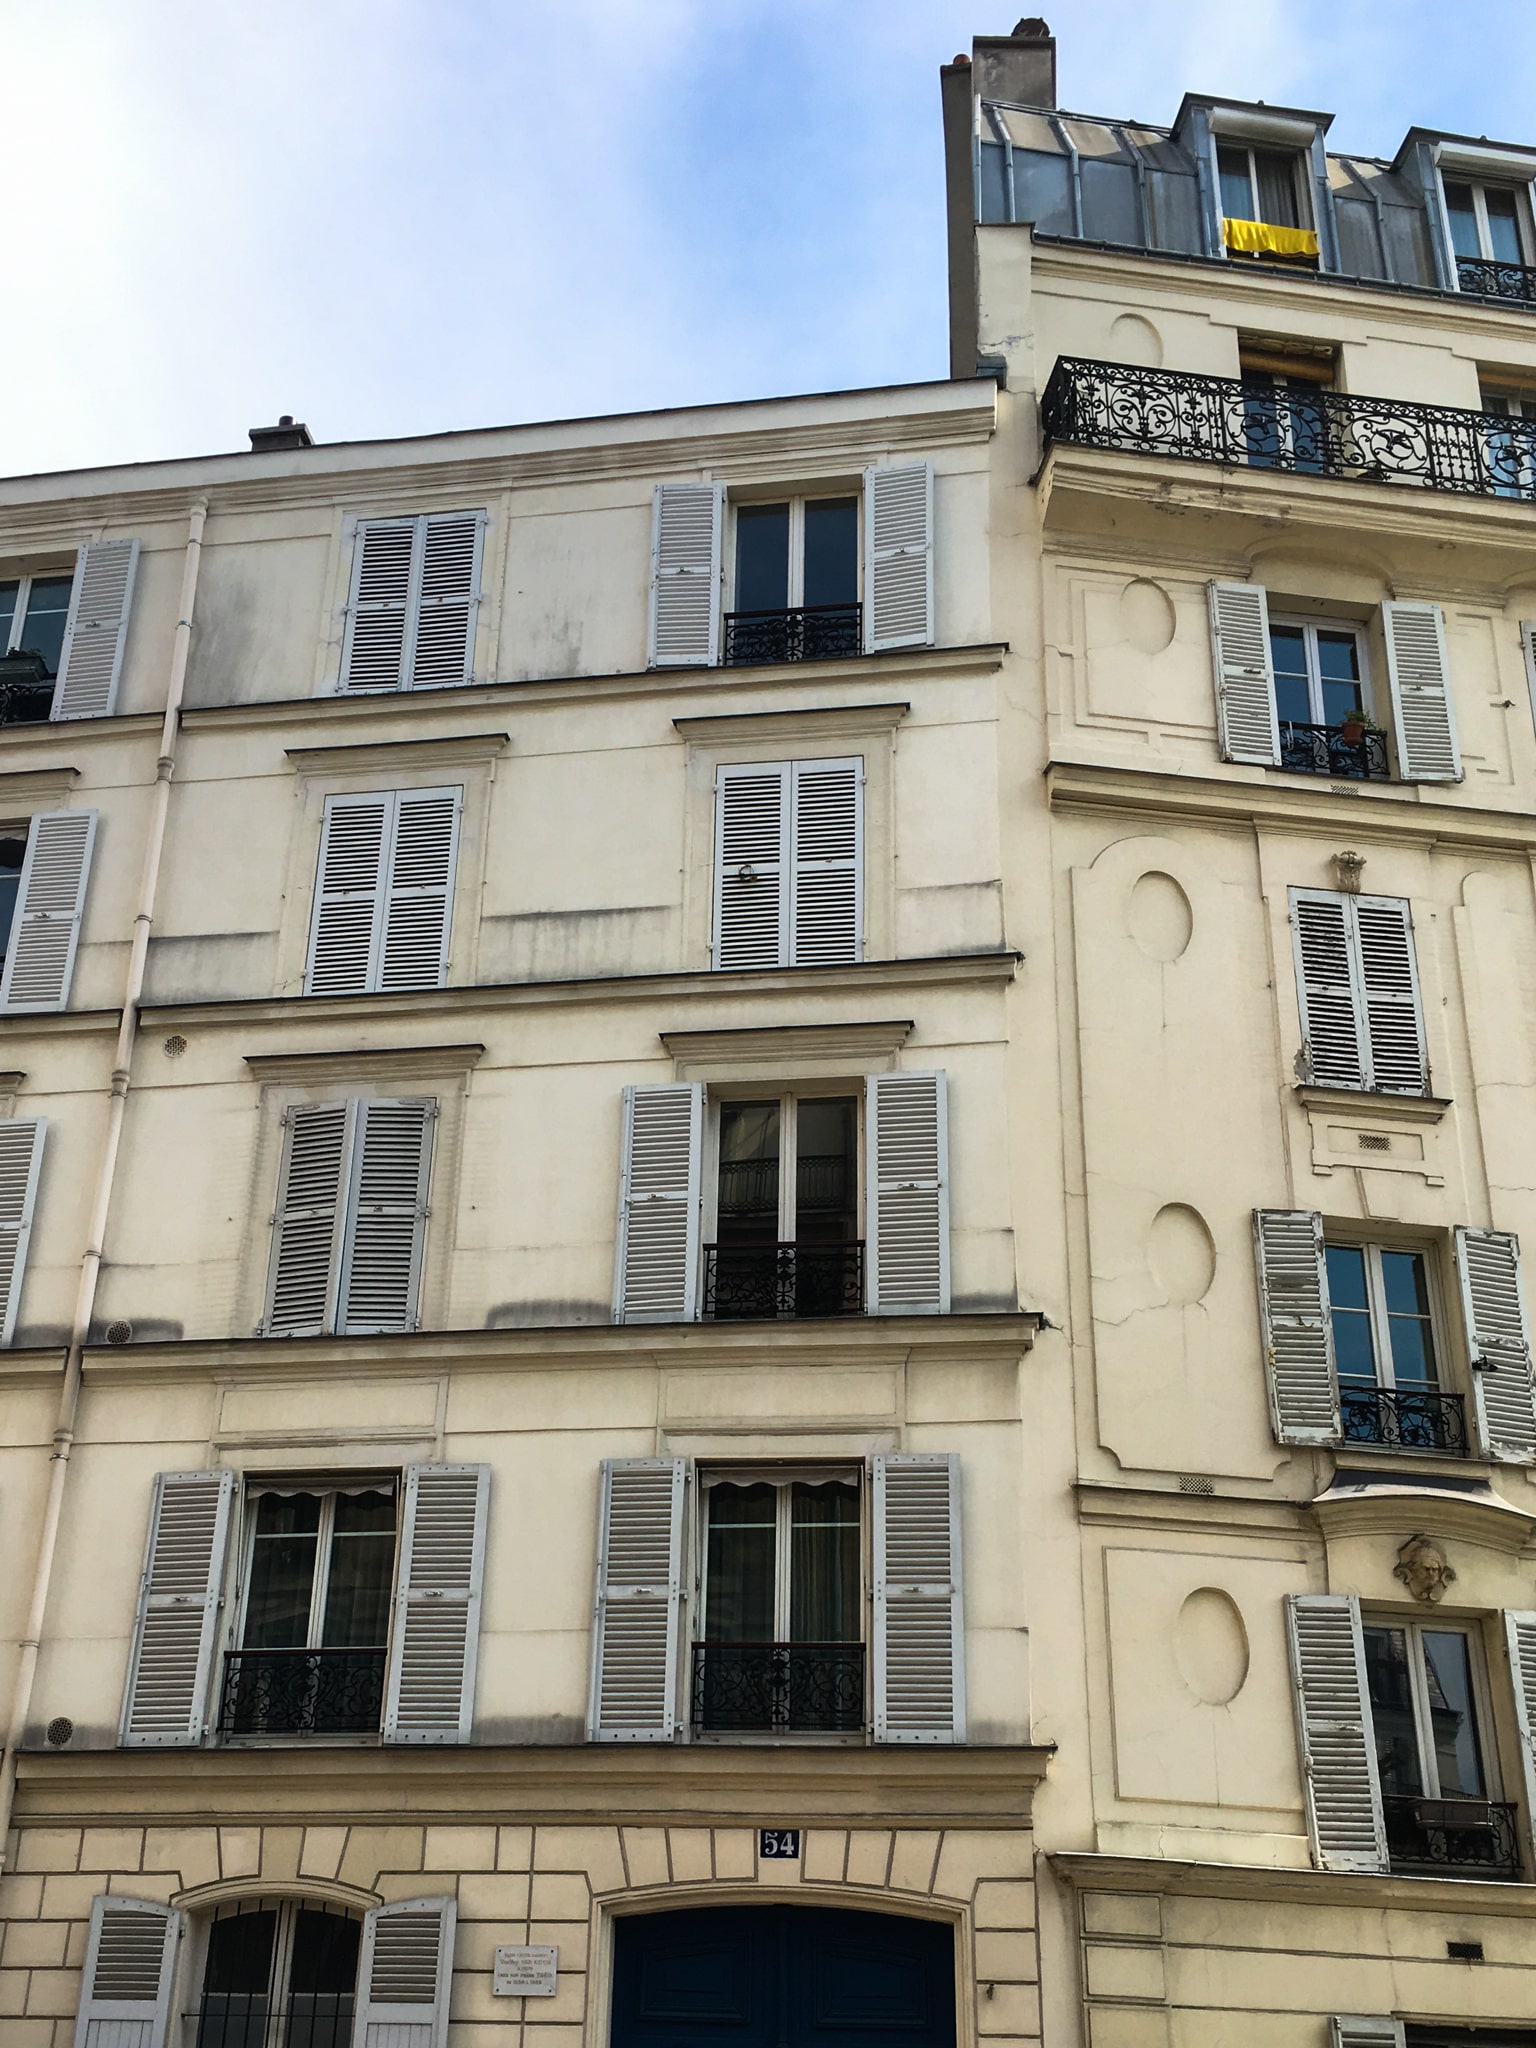 Theo’s apartment building at 54 rue Lepic